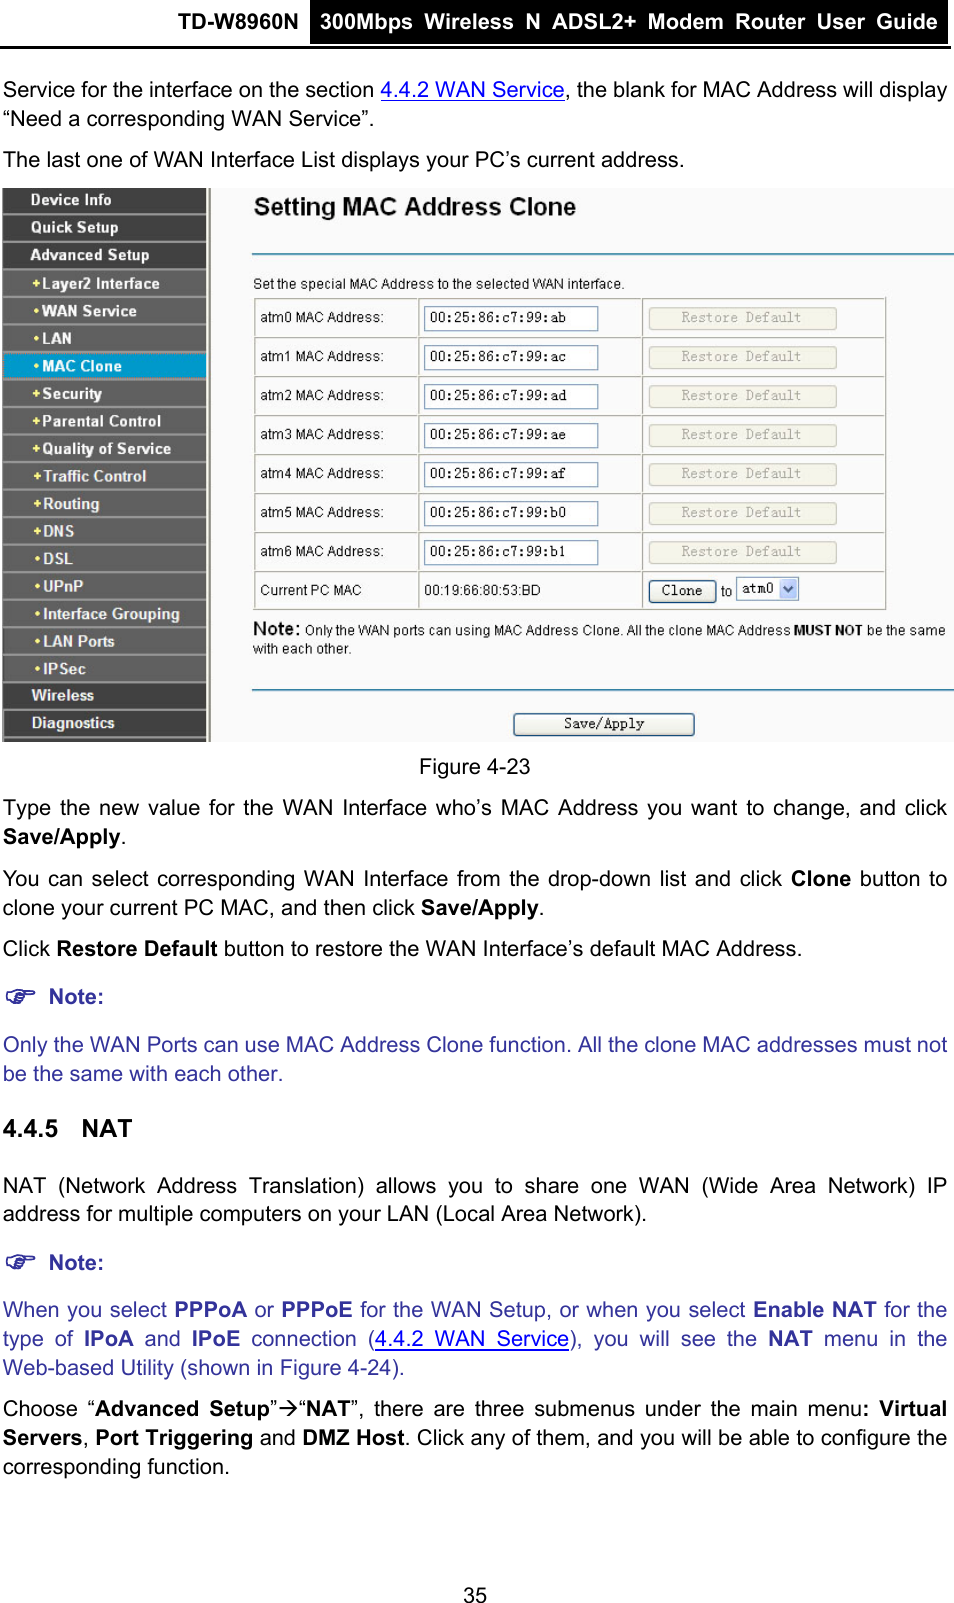 TD-W8960N  300Mbps Wireless N ADSL2+ Modem Router User Guide  Service for the interface on the section 4.4.2 WAN Service, the blank for MAC Address will display “Need a corresponding WAN Service”. The last one of WAN Interface List displays your PC’s current address.  Figure 4-23 Type the new value for the WAN Interface who’s MAC Address you want to change, and click Save/Apply. You can select corresponding WAN Interface from the drop-down list and click Clone button to clone your current PC MAC, and then click Save/Apply. Click Restore Default button to restore the WAN Interface’s default MAC Address. ) Note: Only the WAN Ports can use MAC Address Clone function. All the clone MAC addresses must not be the same with each other. 4.4.5  NAT NAT (Network Address Translation) allows you to share one WAN (Wide Area Network) IP address for multiple computers on your LAN (Local Area Network). ) Note: When you select PPPoA or PPPoE for the WAN Setup, or when you select Enable NAT for the type of IPoA and IPoE  connection (4.4.2 WAN Service), you will see the NAT menu in the Web-based Utility (shown in Figure 4-24). Choose “Advanced Setup”Æ“NAT”, there are three submenus under the main menu: Virtual Servers, Port Triggering and DMZ Host. Click any of them, and you will be able to configure the corresponding function. 35 